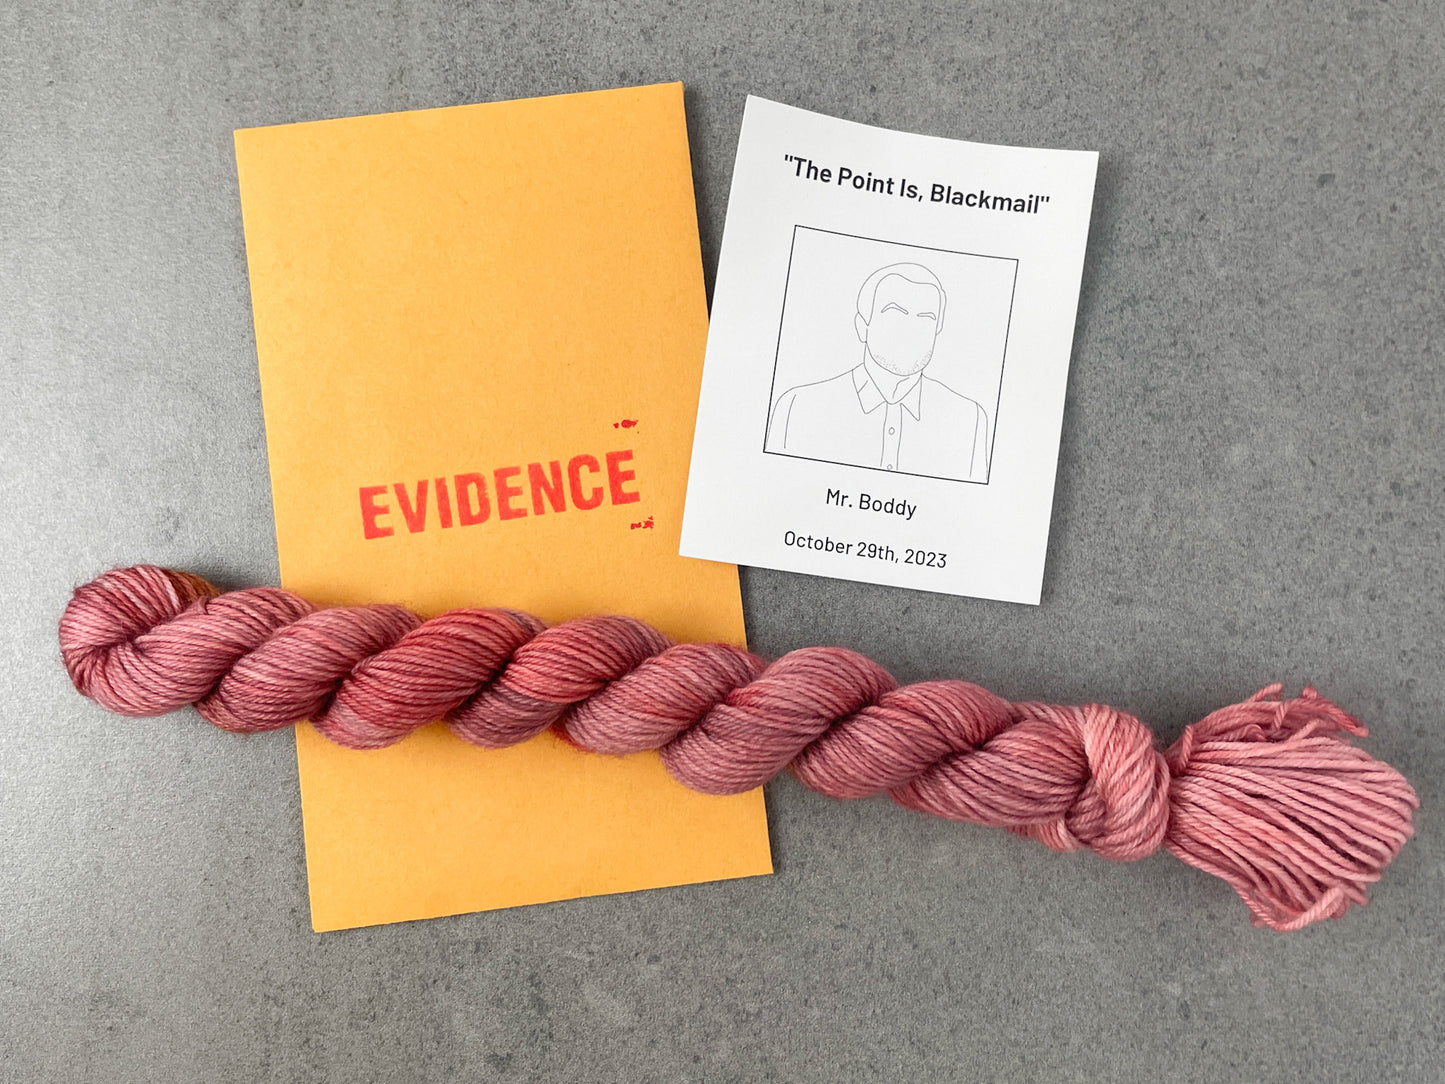 A skein of red-leaning pink tonal yarn on top of an envelope stamped with "Evidence" and a card with a drawing of Mr. Boddy on it.